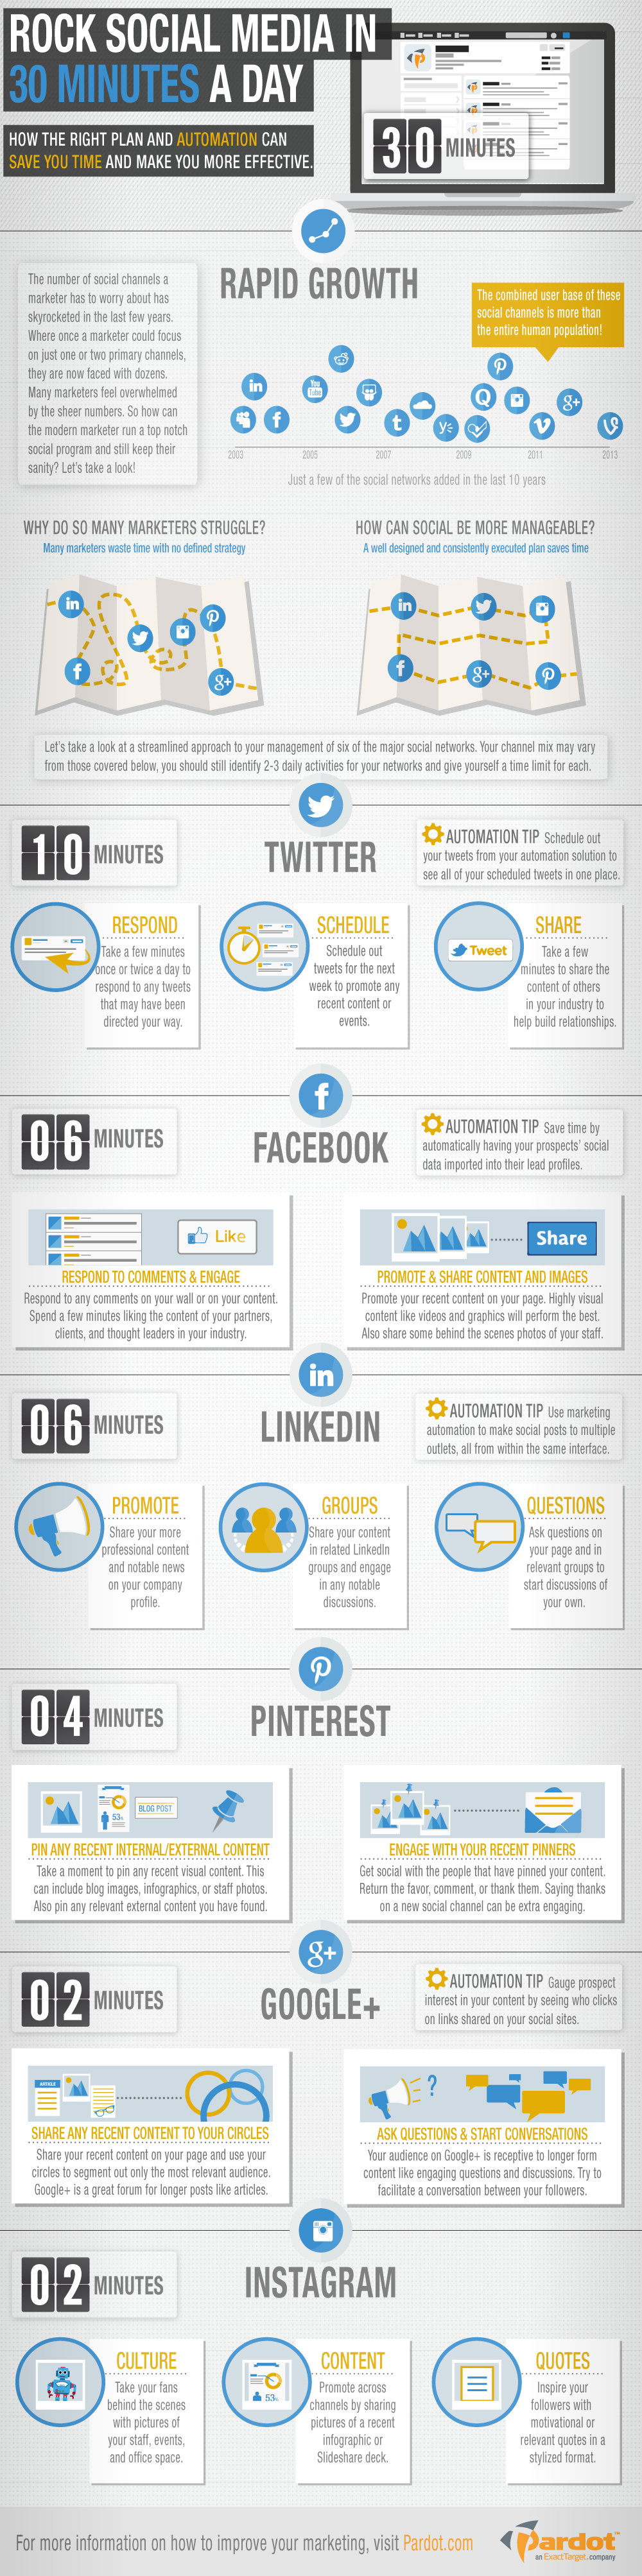 Rock Social Media in 30 Minutes a Day [INFOGRAPHIC] - An Infographic from Pardot